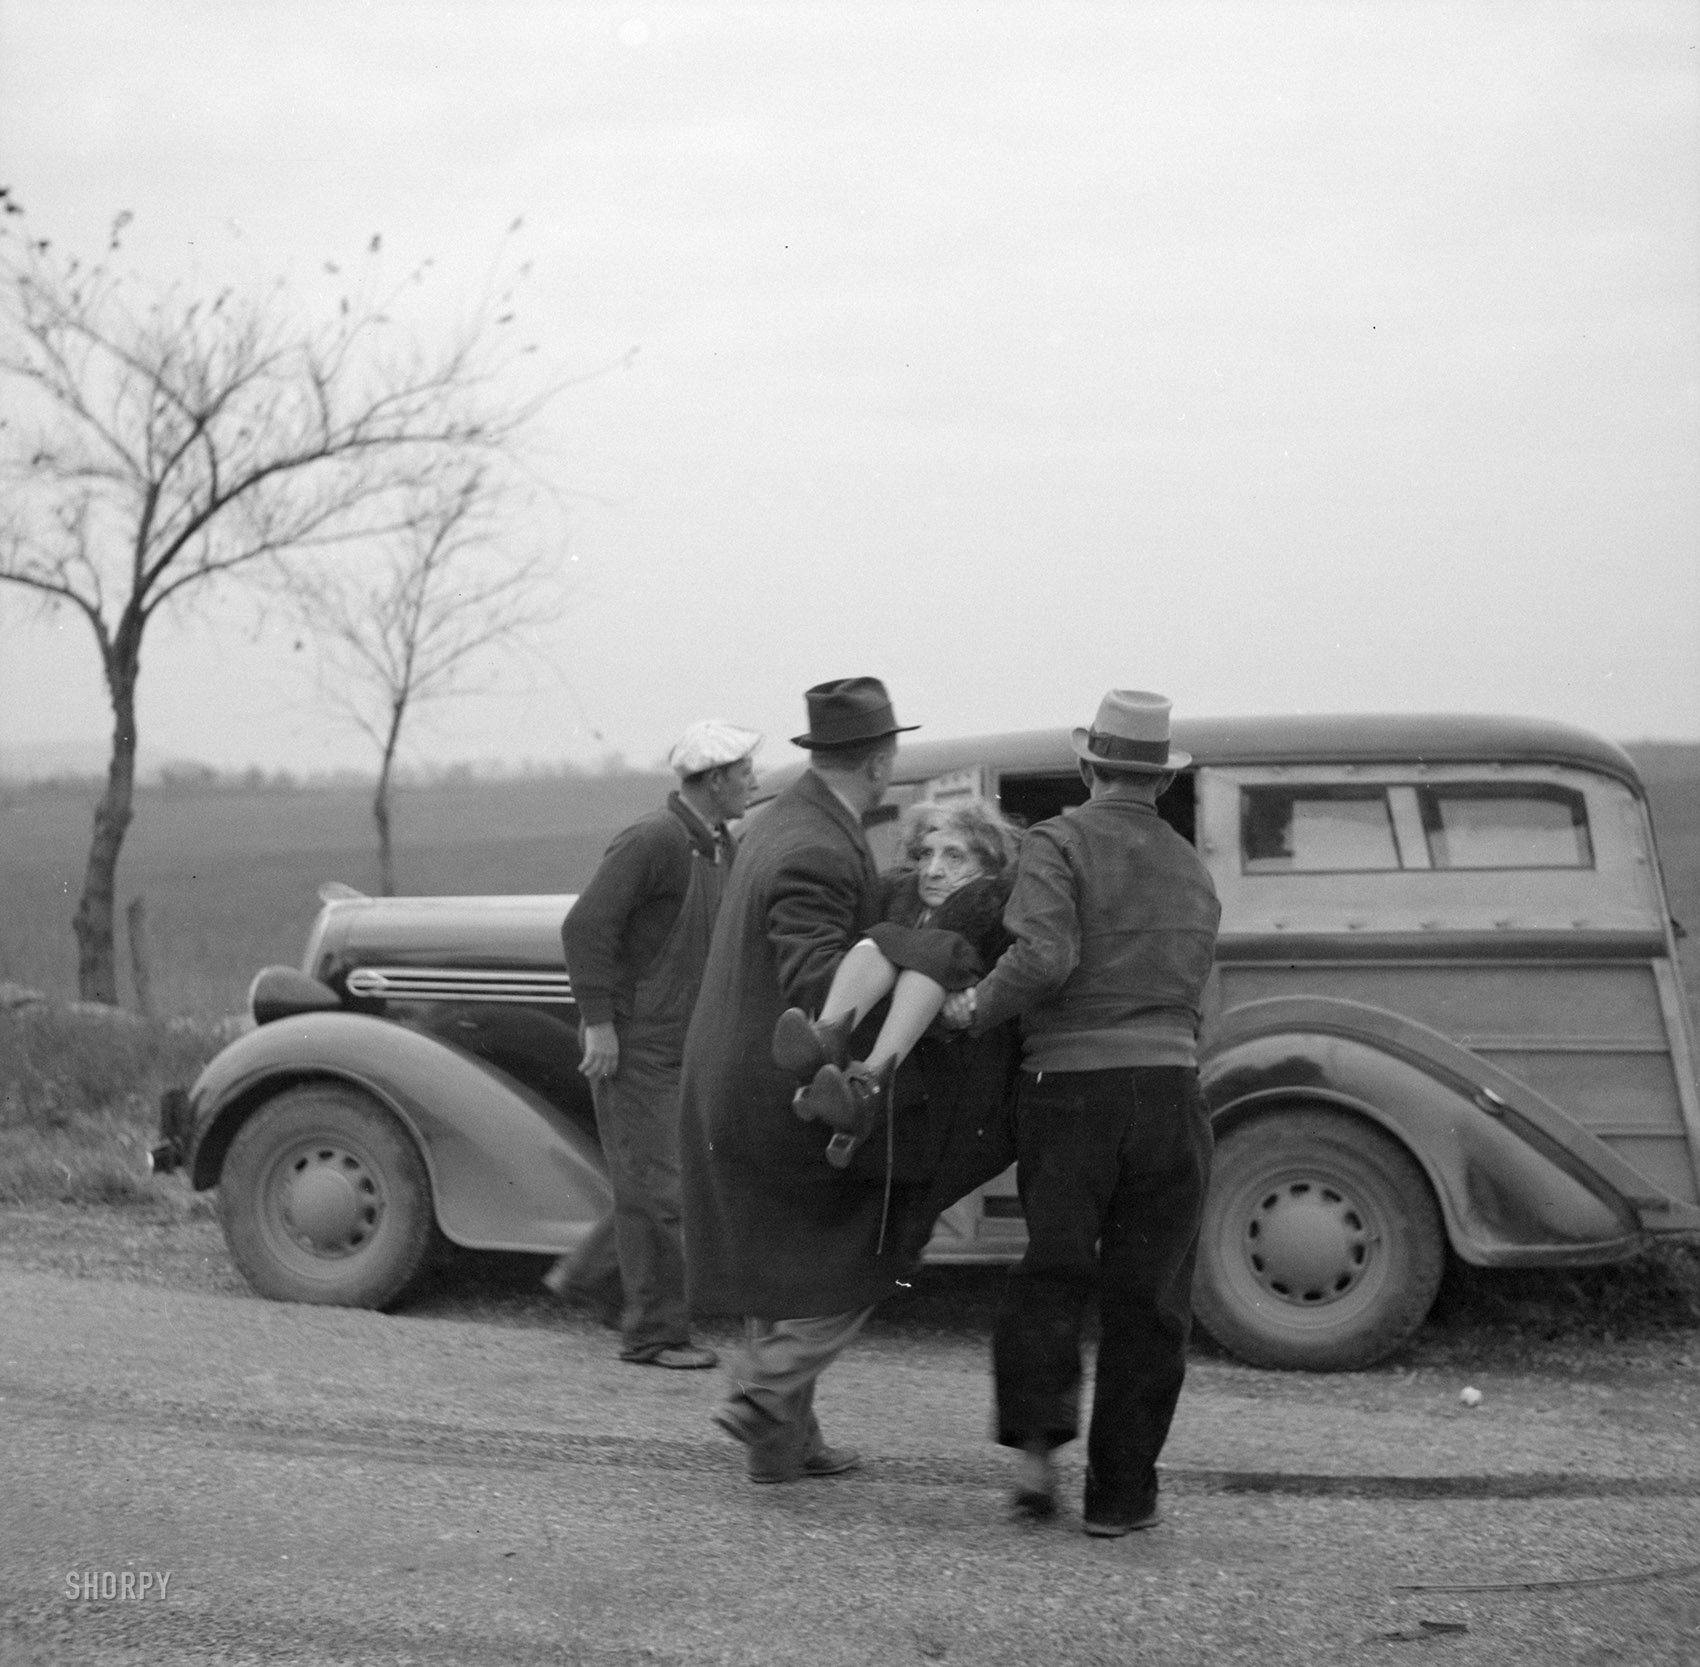 November 1936. "Automobile accident on U.S. 40 between Hagerstown and Cumberland, Maryland." Crash Reconstruction, Part 3, and the last shot in this mini-series snapped by Arthur Rothstein. View full size.